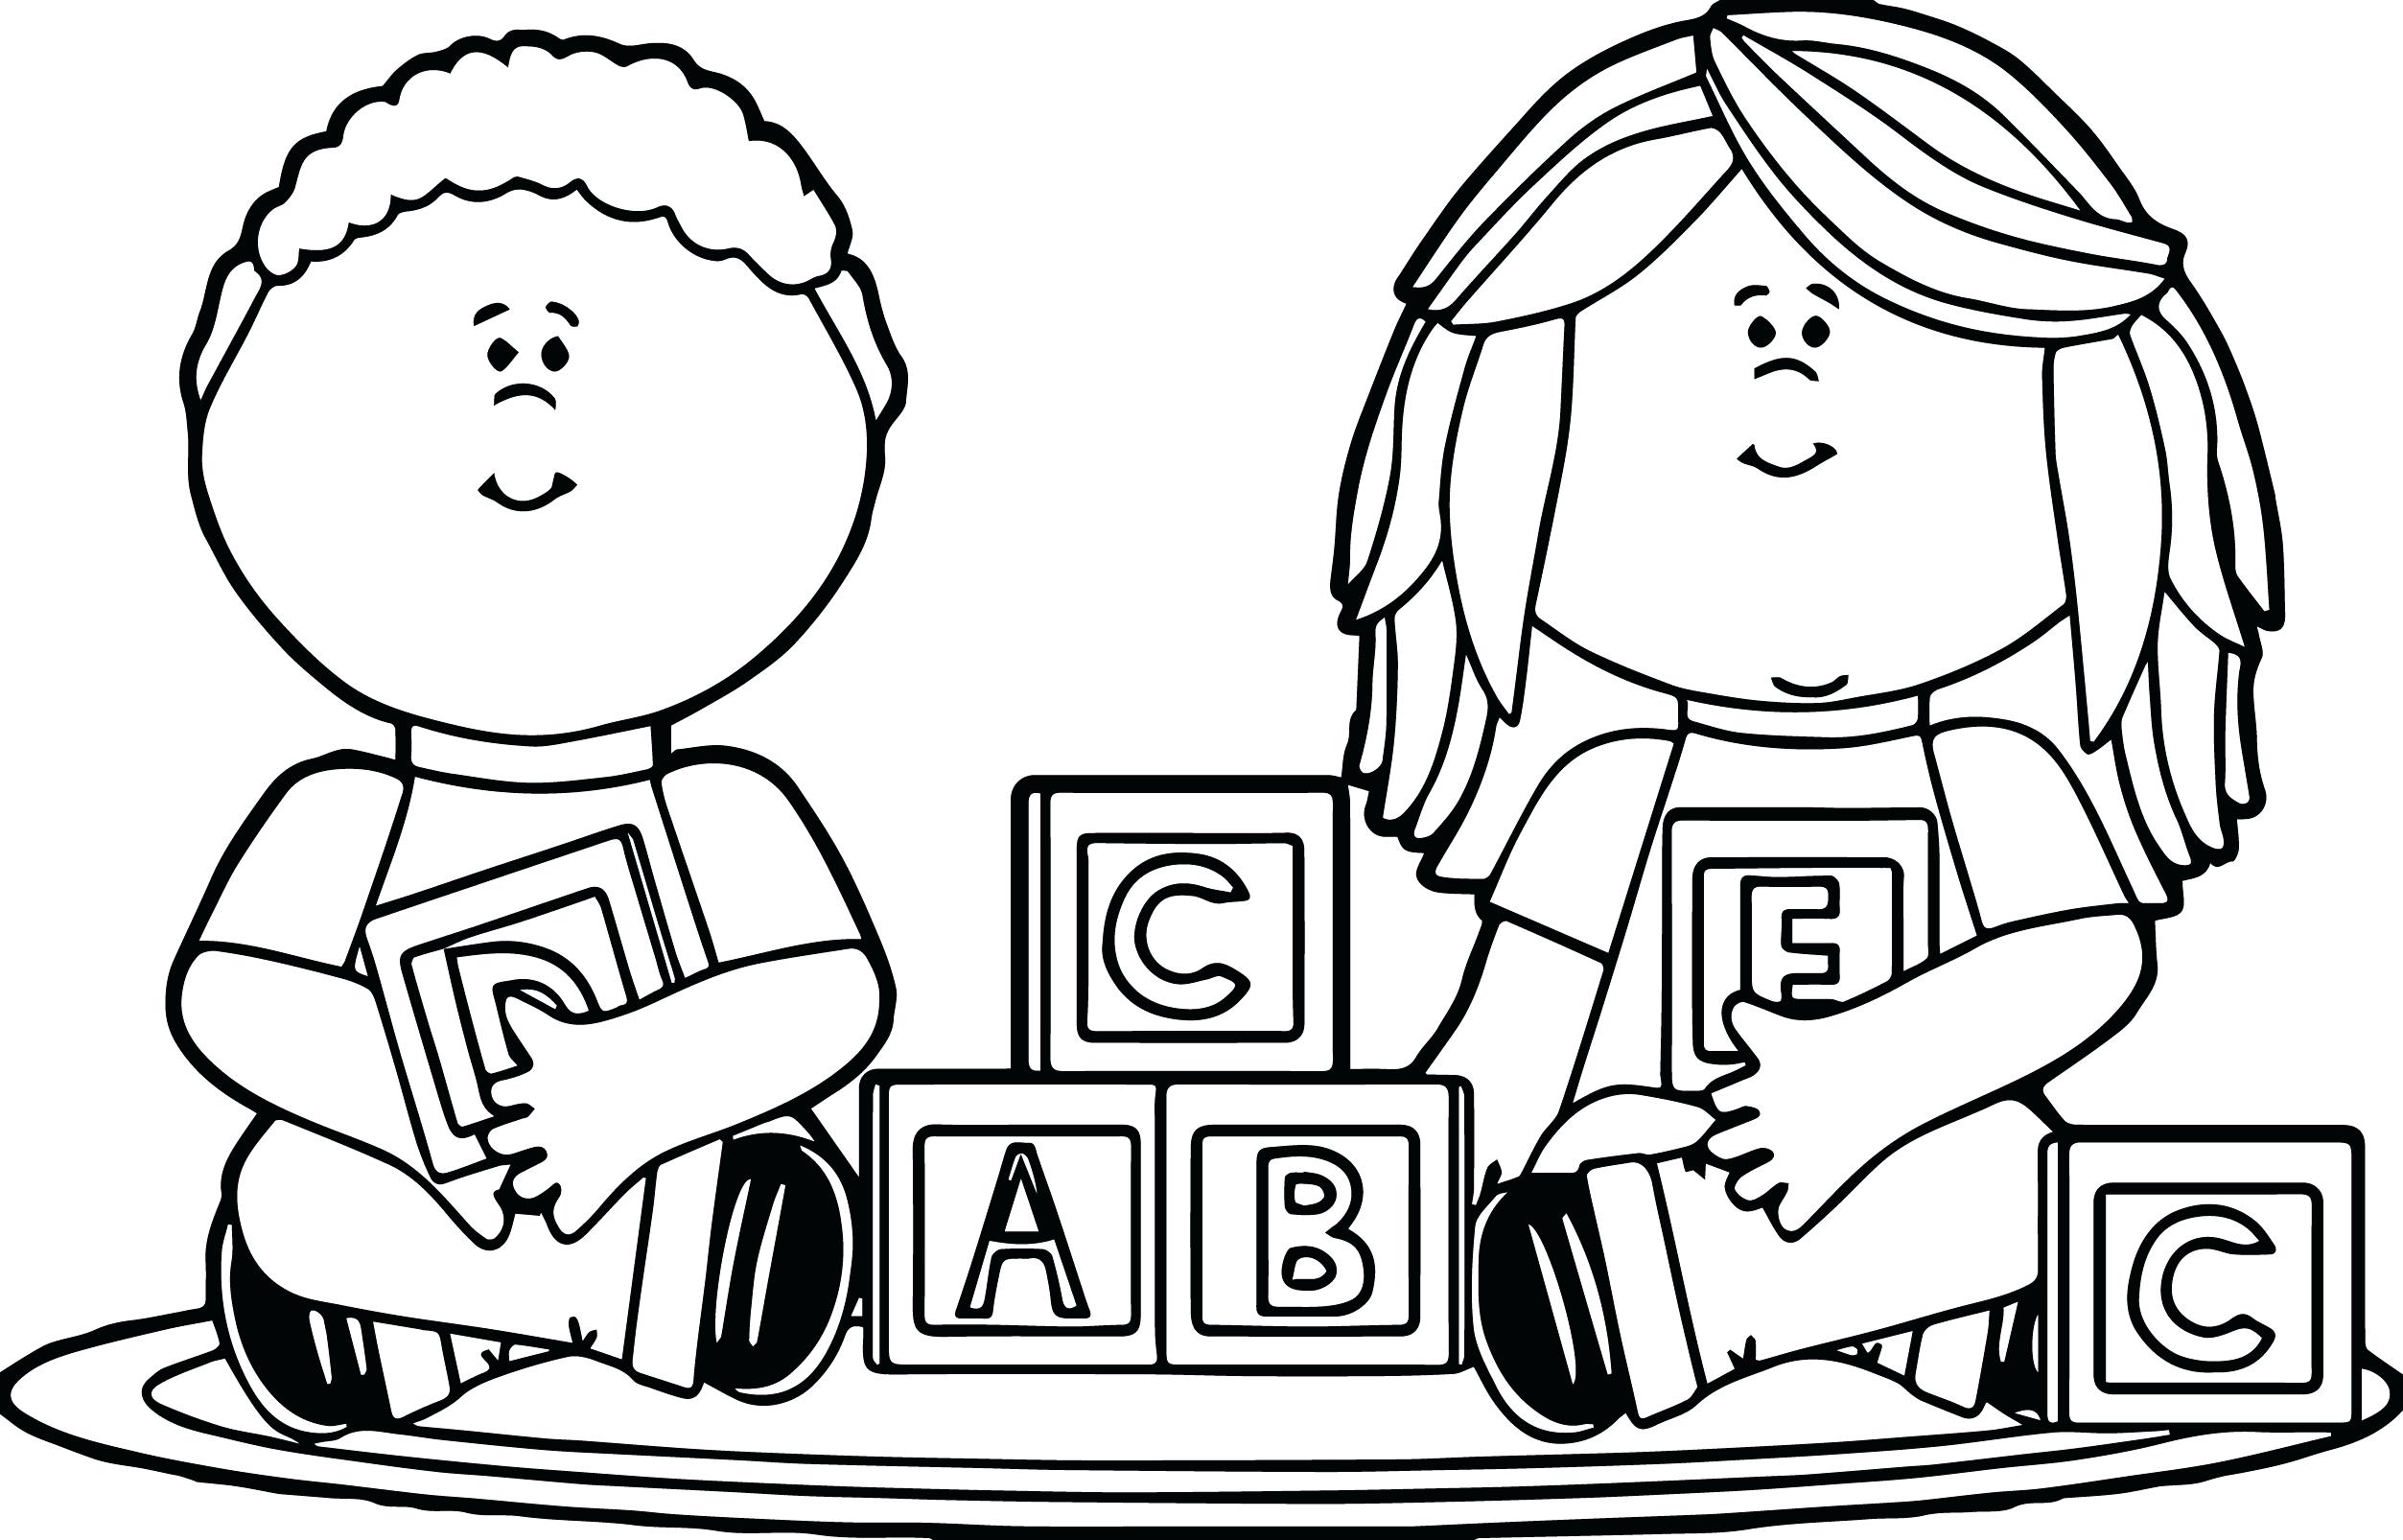 Starry-shine: Kids Playing Coloring Pages